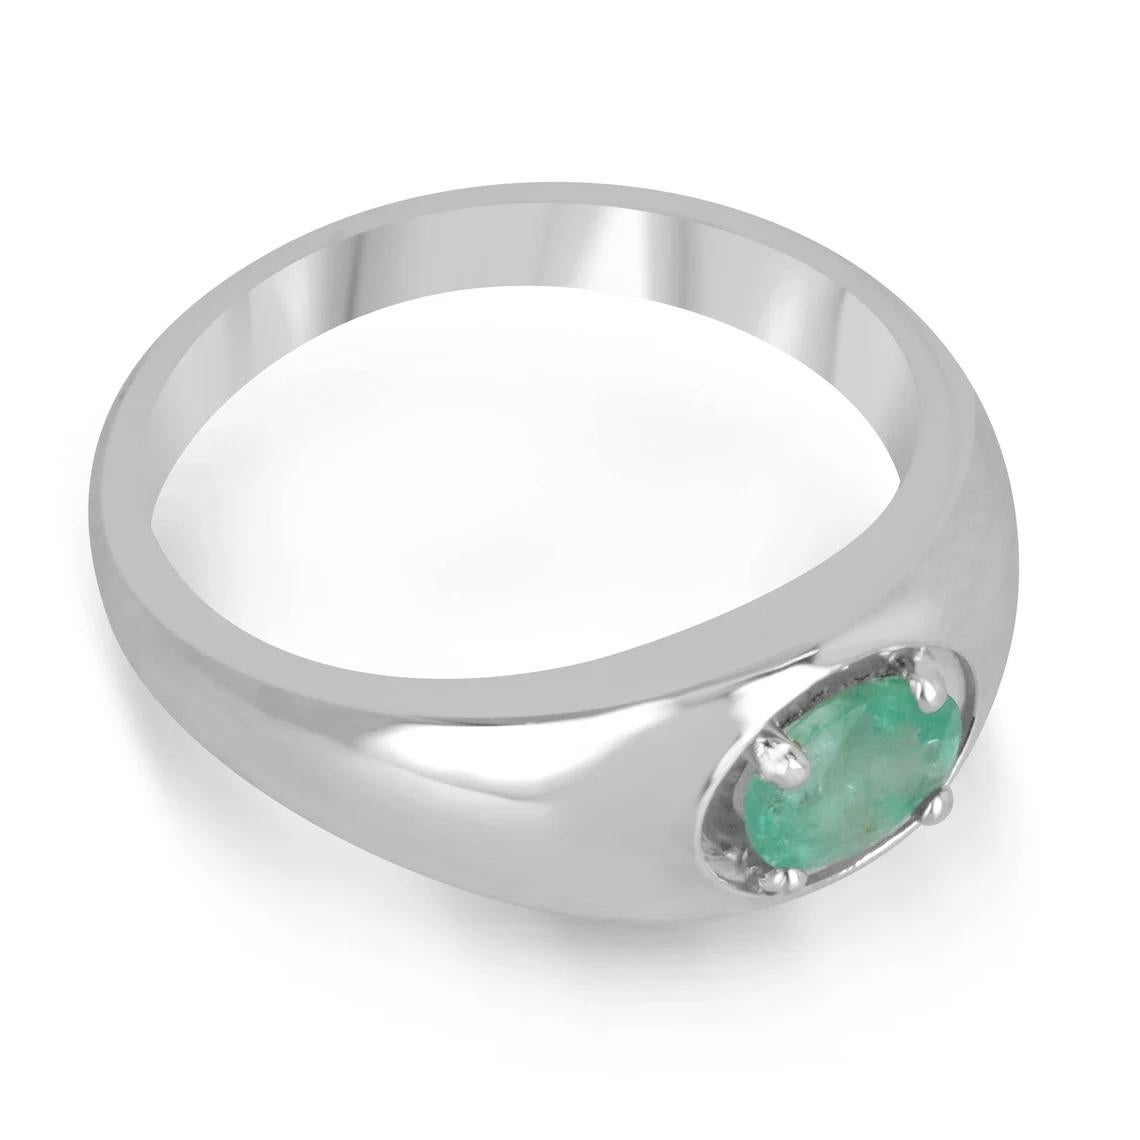 A dapper natural emerald oval cut solitaire ring. This exquisite piece features a gorgeous oval-cut emerald from the mines of Zambia. The gemstone showcases a beautiful shine, mossy medium green color, and good luster. Four-prong set in a shiny